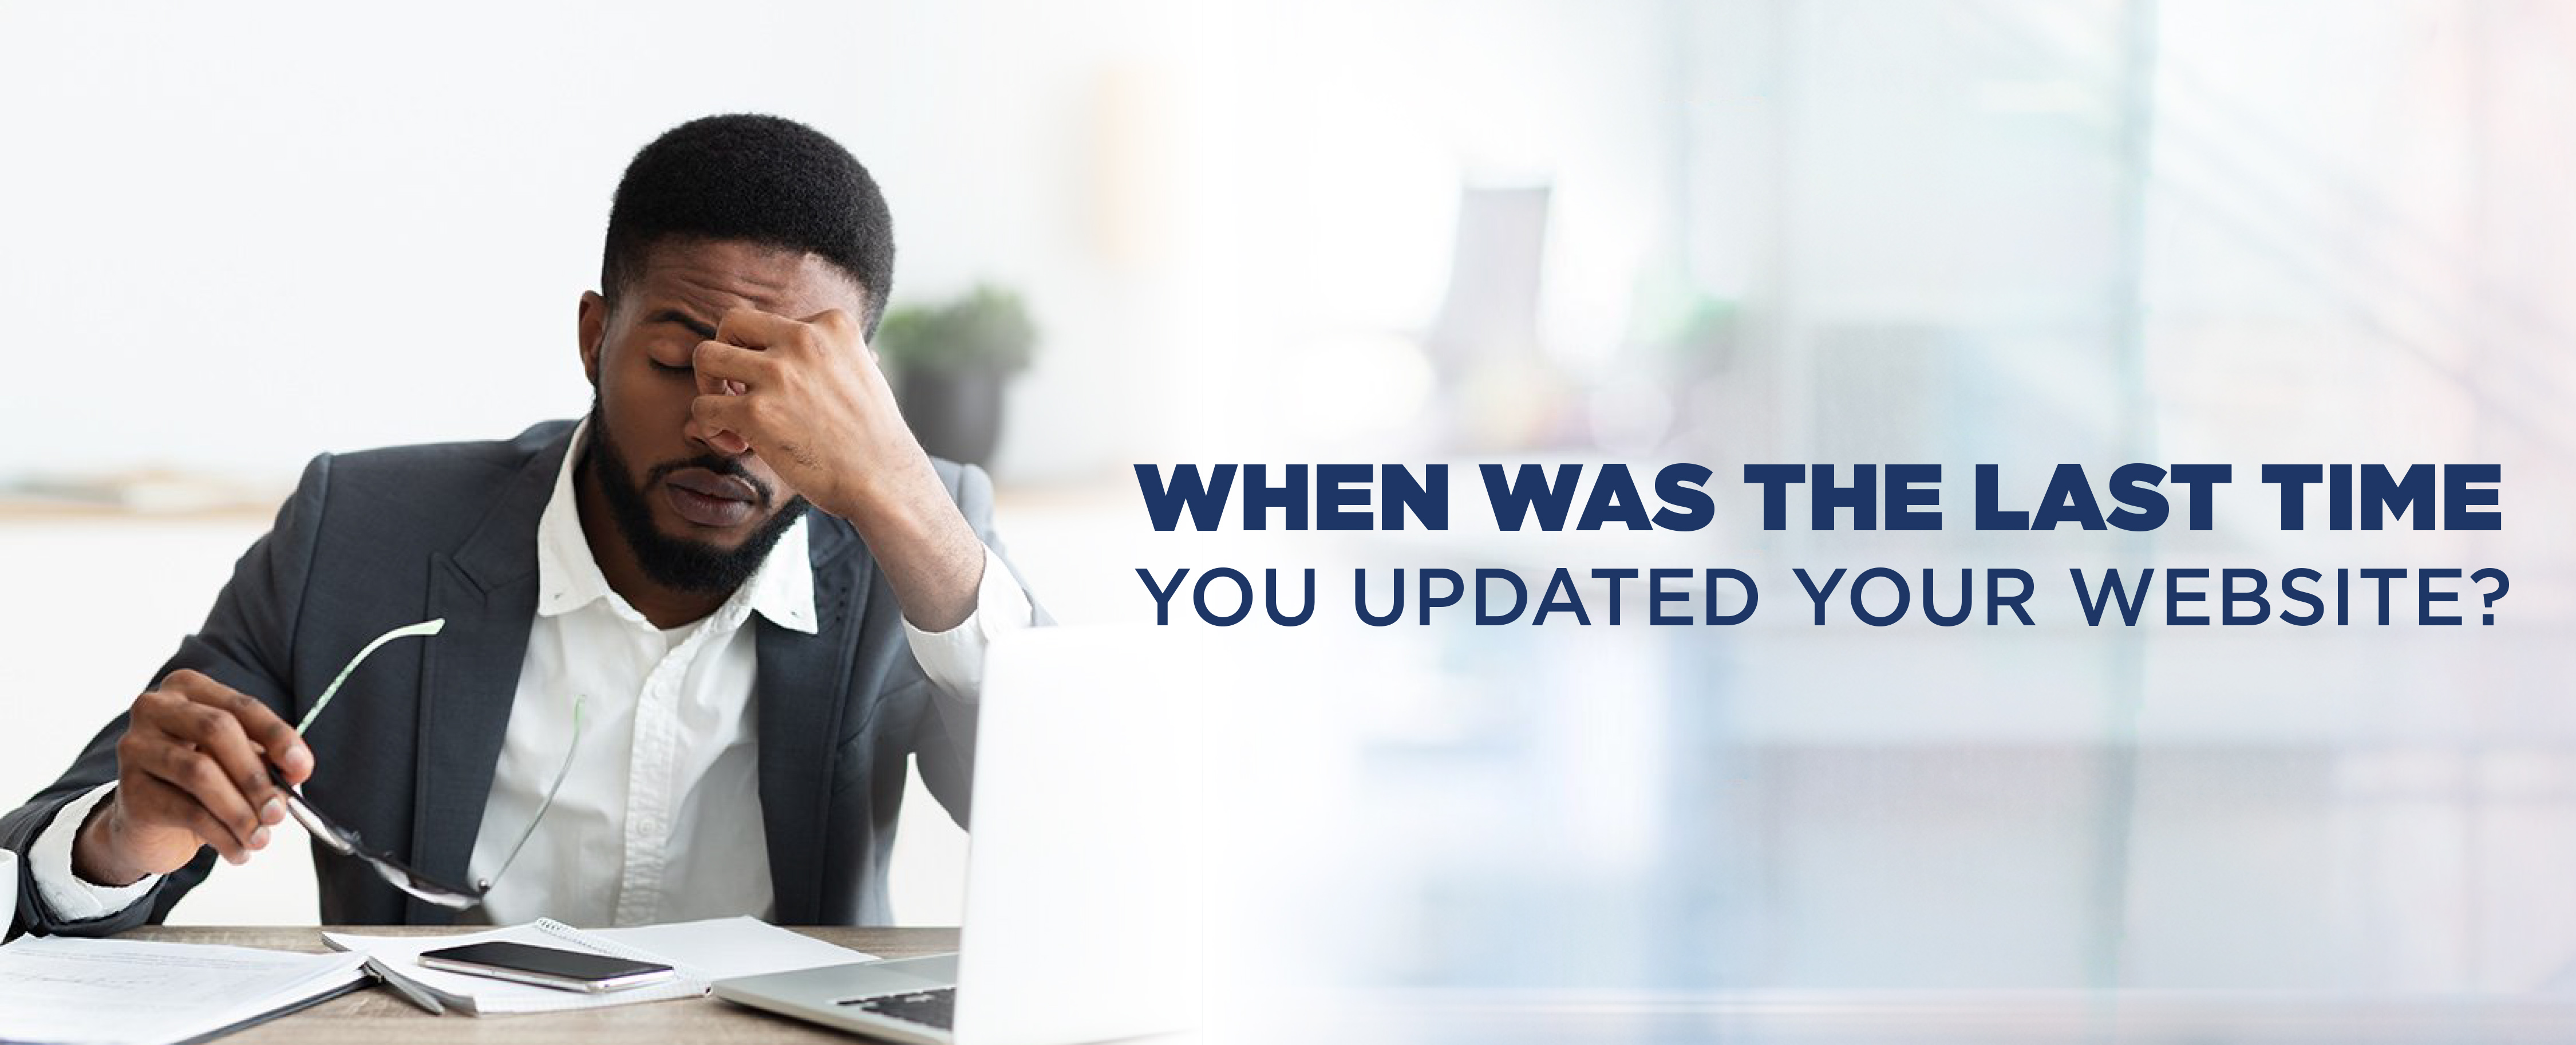 WHEN WAS THE LAST TIME YOU UPDATED YOUR WEBSITE?